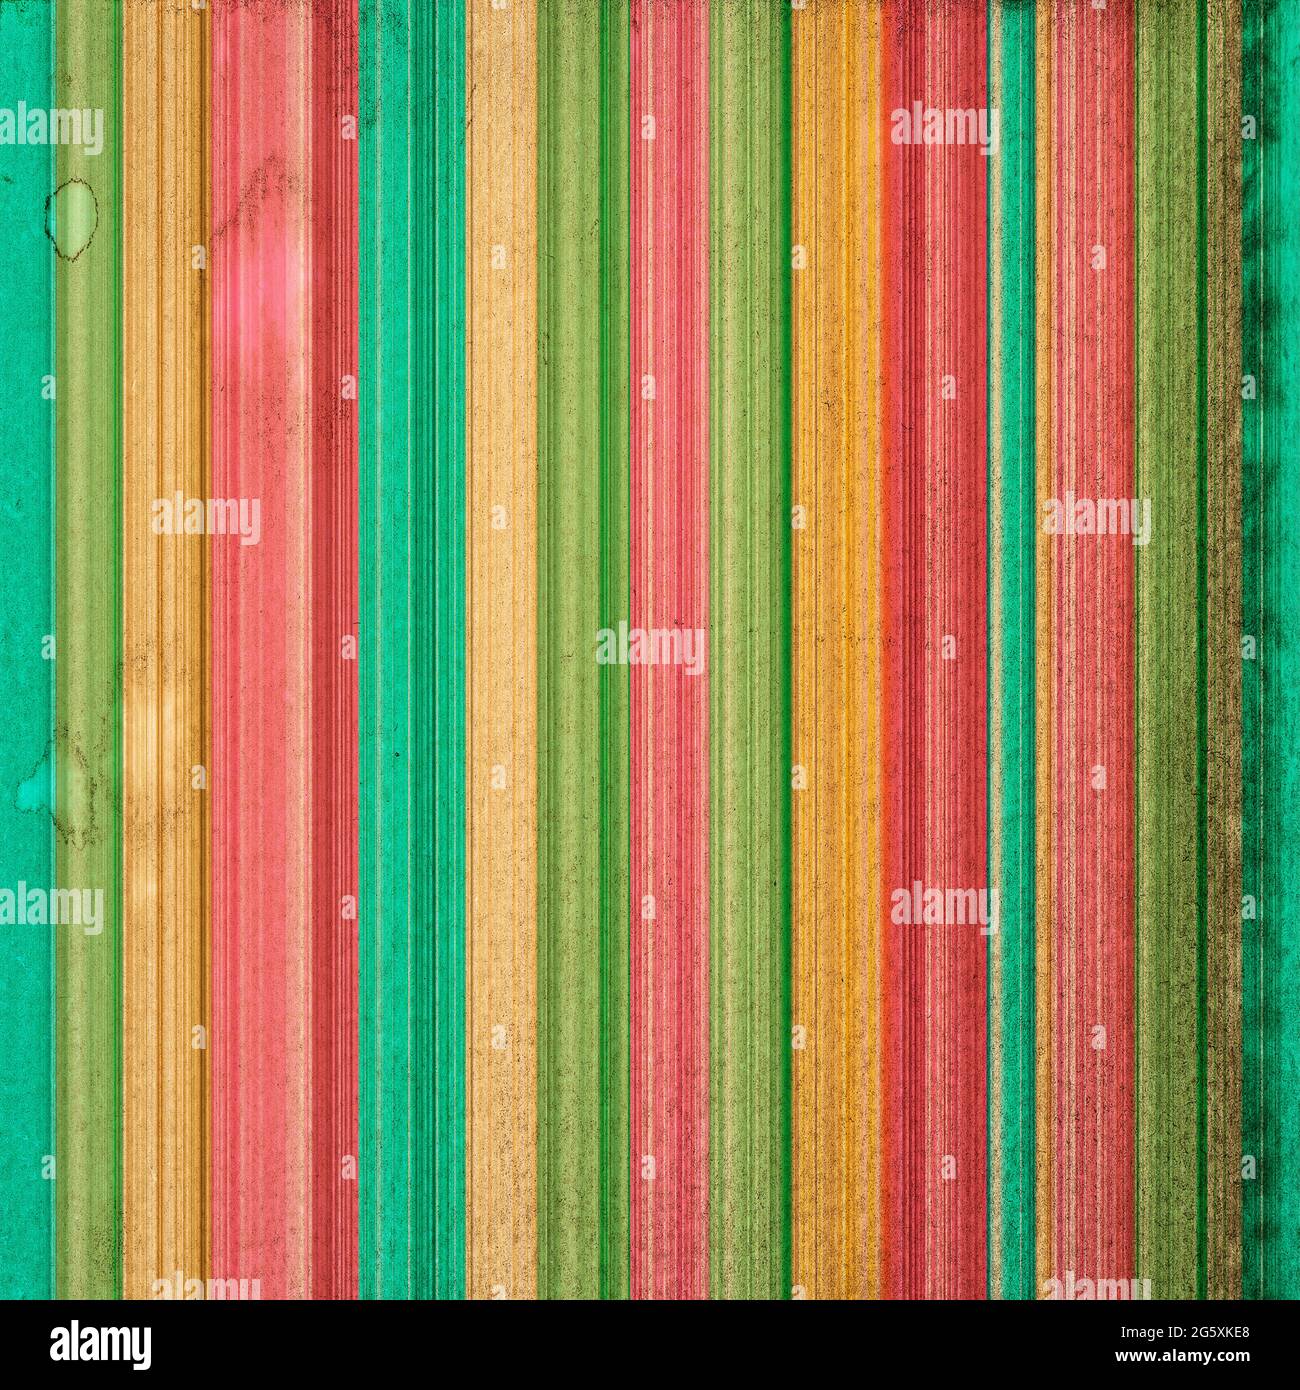 Striped wallpaper. Vintage aged abstract lines background Stock Photo